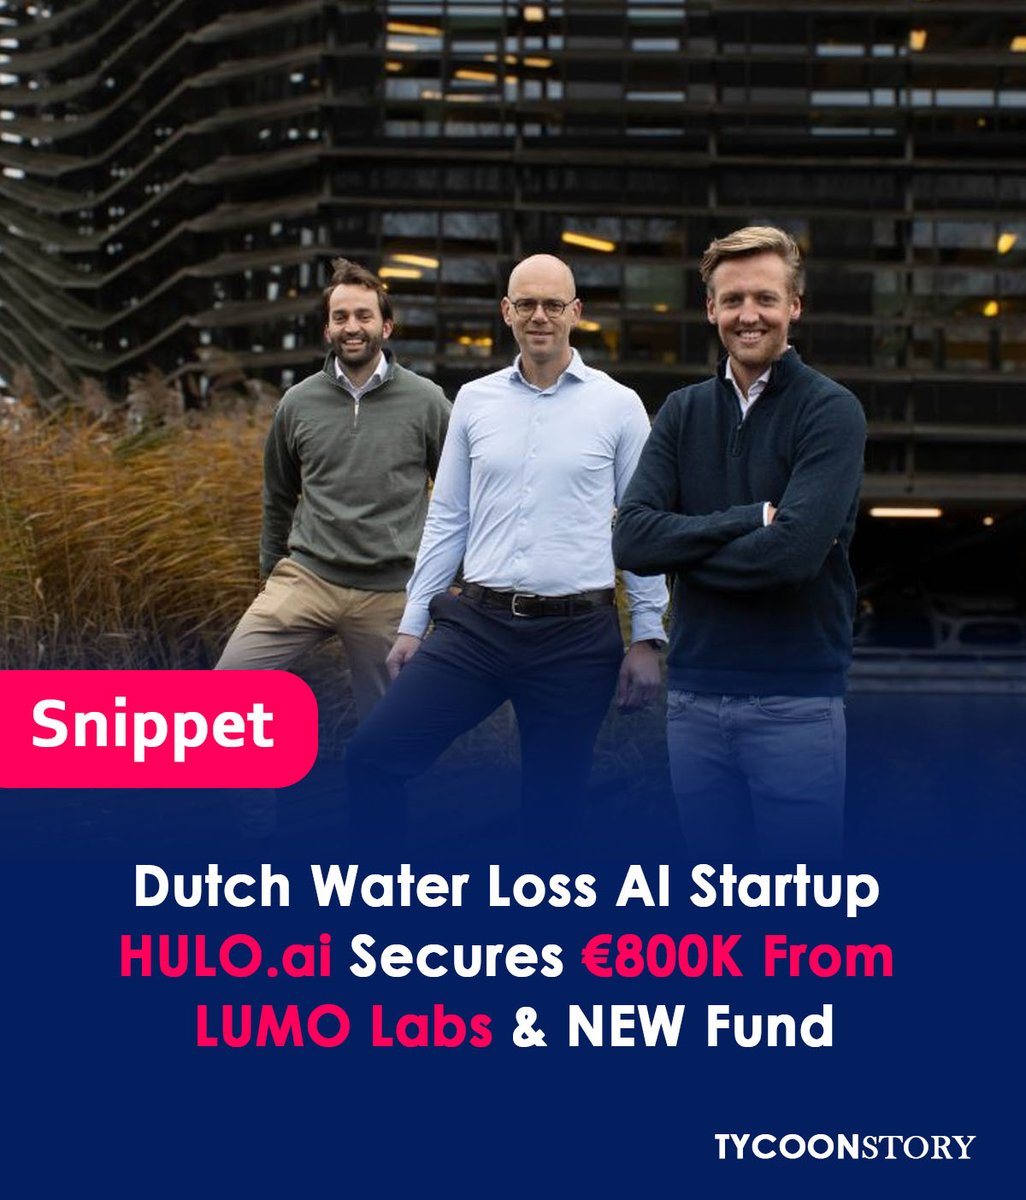 Dutch startup HULO. ai raises €800K to deploy AI in tackling large-scale drinking water losses
#leeuwarden #strategicpartners #research #physicalinfrastructure #waterdistribution #interventions #sustainablewater #Netherlands
#startup #waterloss #AI #watertechnology #waterleakage